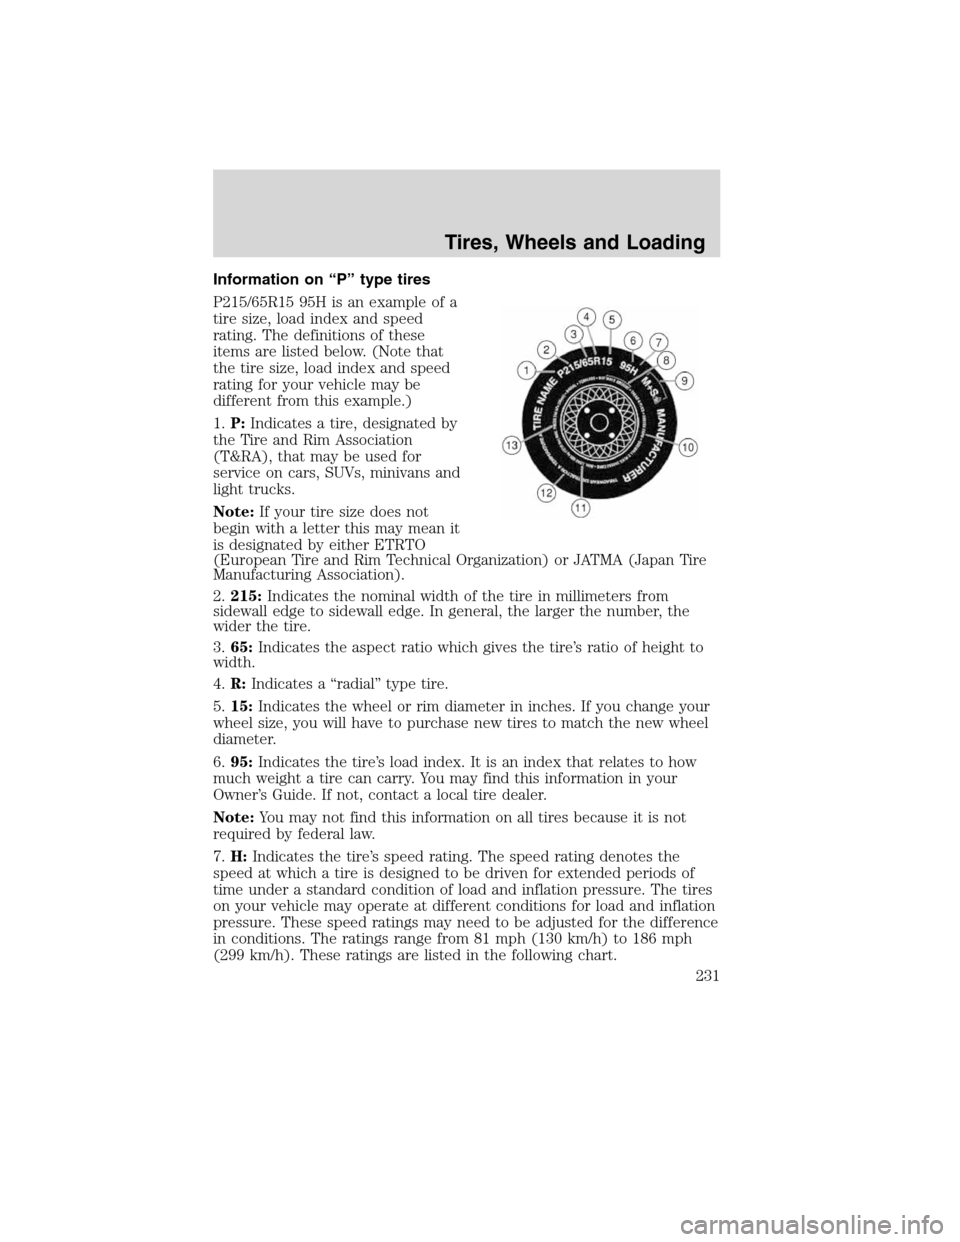 FORD FLEX 2010 1.G Owners Manual Information on “P” type tires
P215/65R15 95H is an example of a
tire size, load index and speed
rating. The definitions of these
items are listed below. (Note that
the tire size, load index and sp